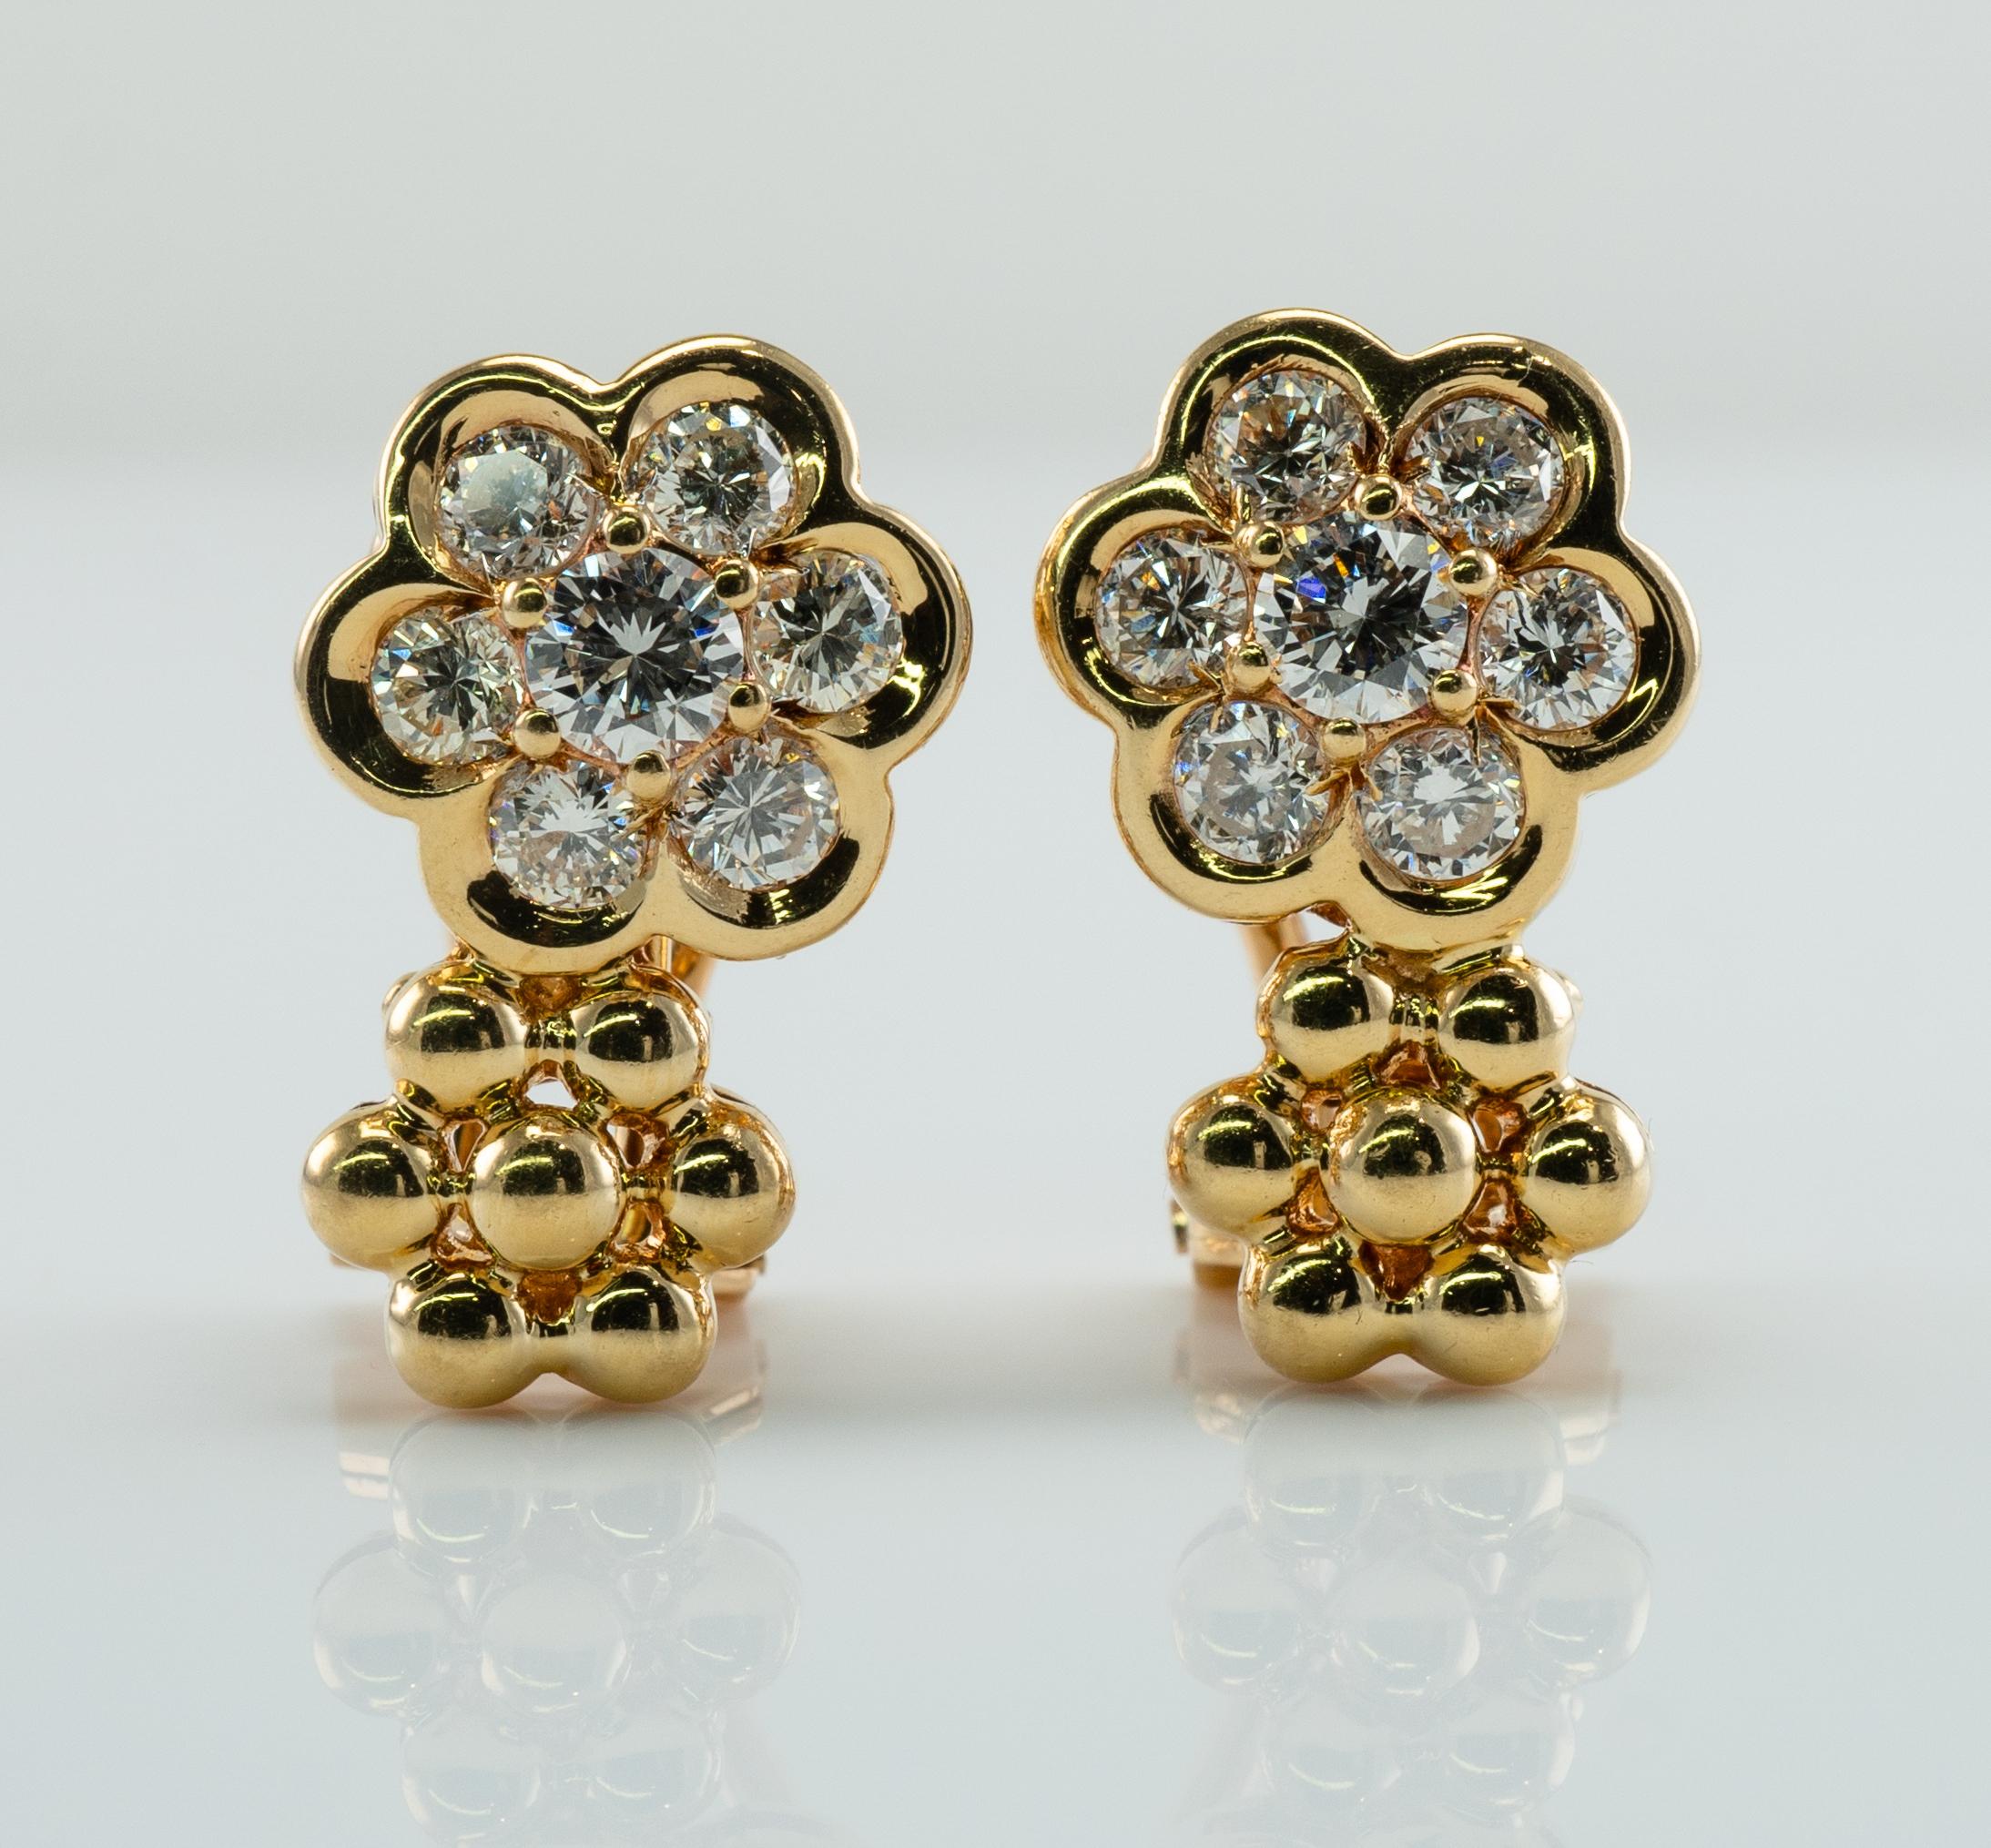 Cluster Diamond Flower Earrings 18K Gold 1.32 TDW Convertible Pierced and Clips

These gorgeous estate earrings are finely crafted in solid 18K Yellow gold.
Each earring is set with 7 Genuine Diamonds of VVS2 clarity and G color! 
The grand total